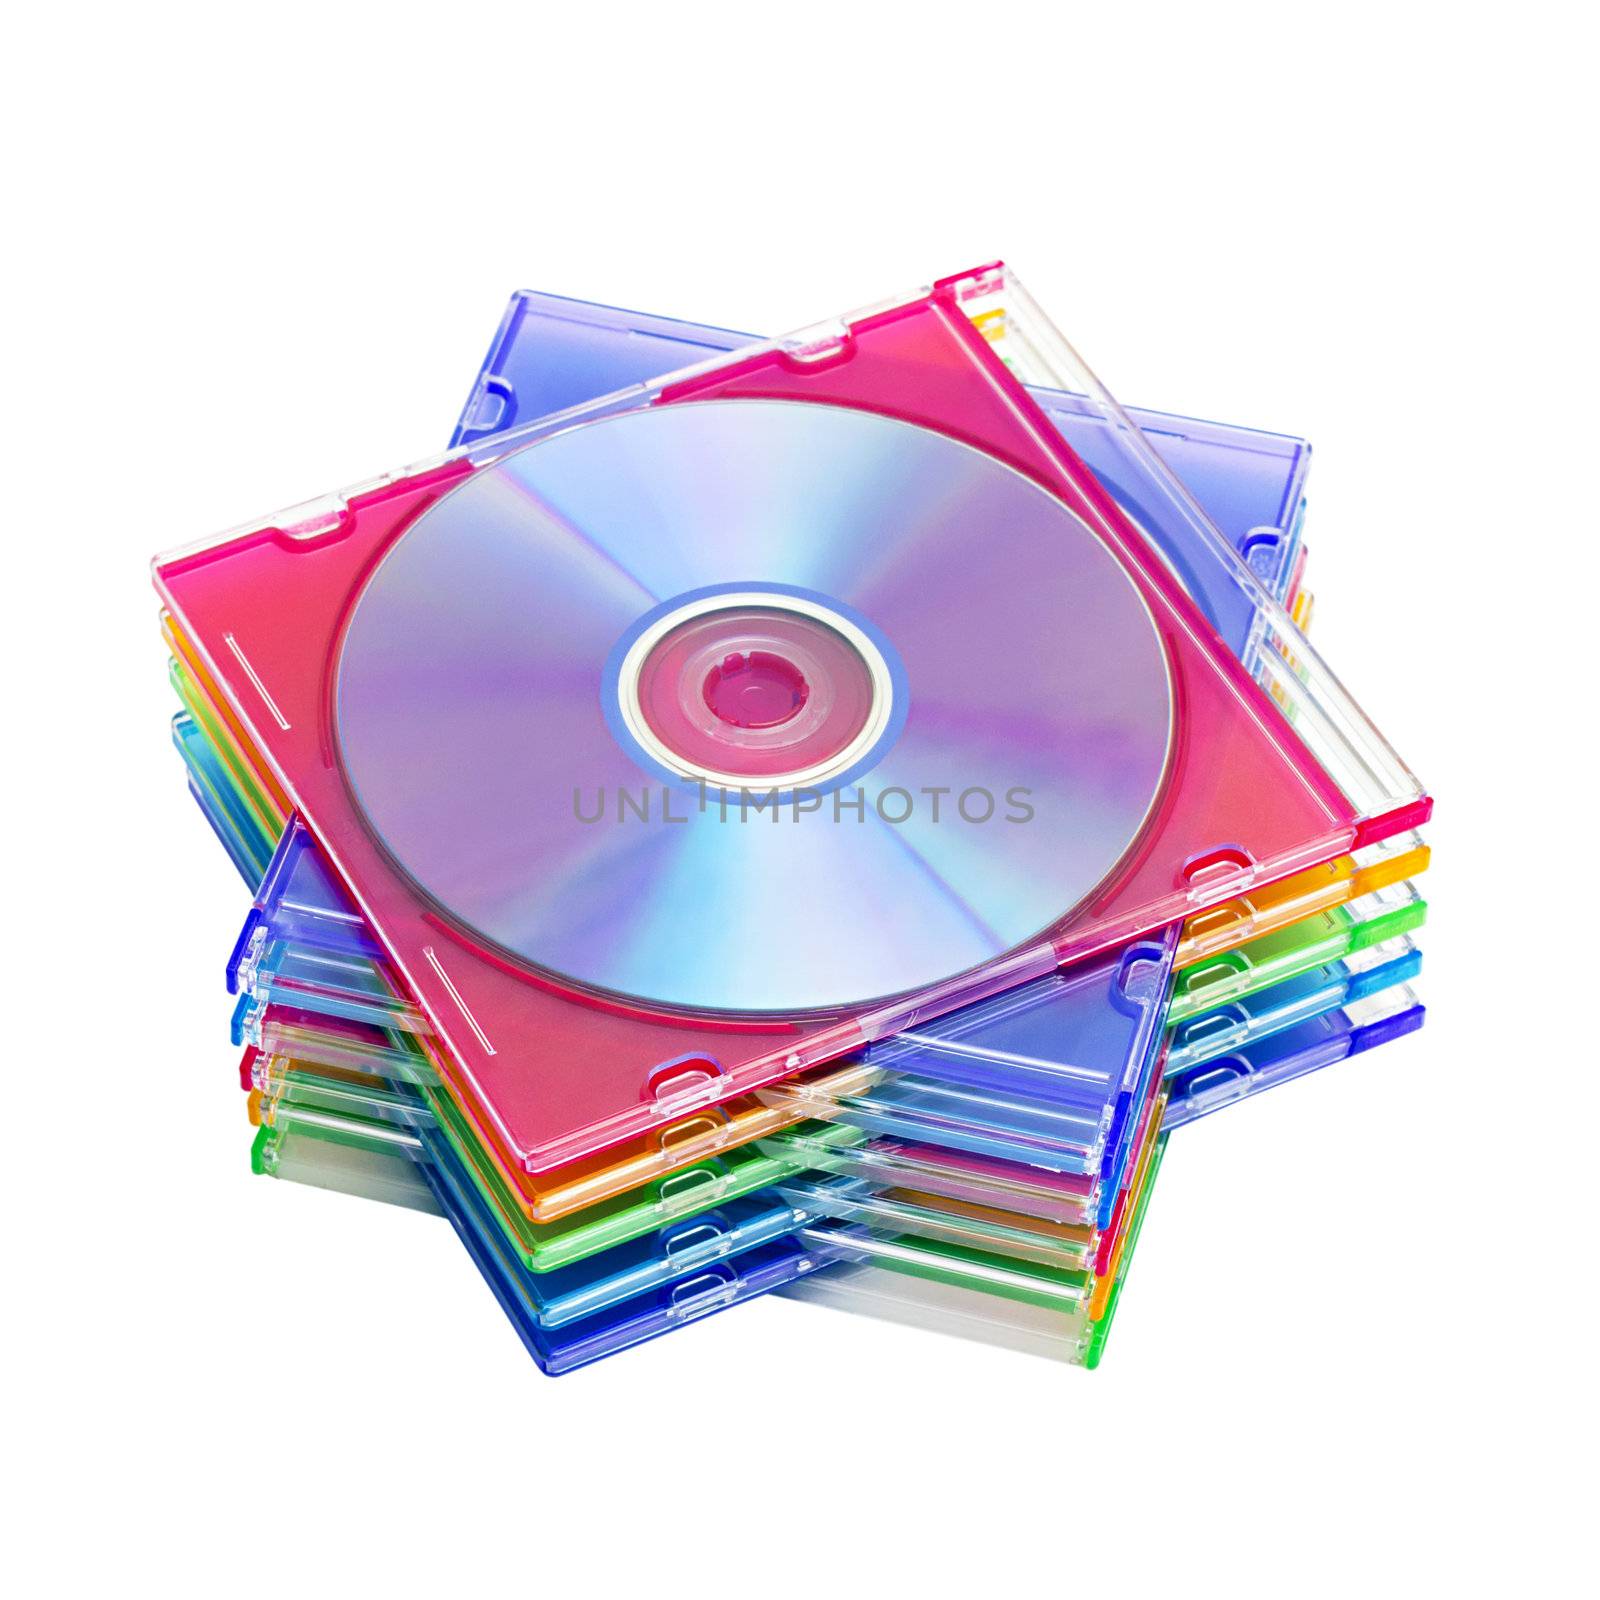 a stack of colored discs by Plus69